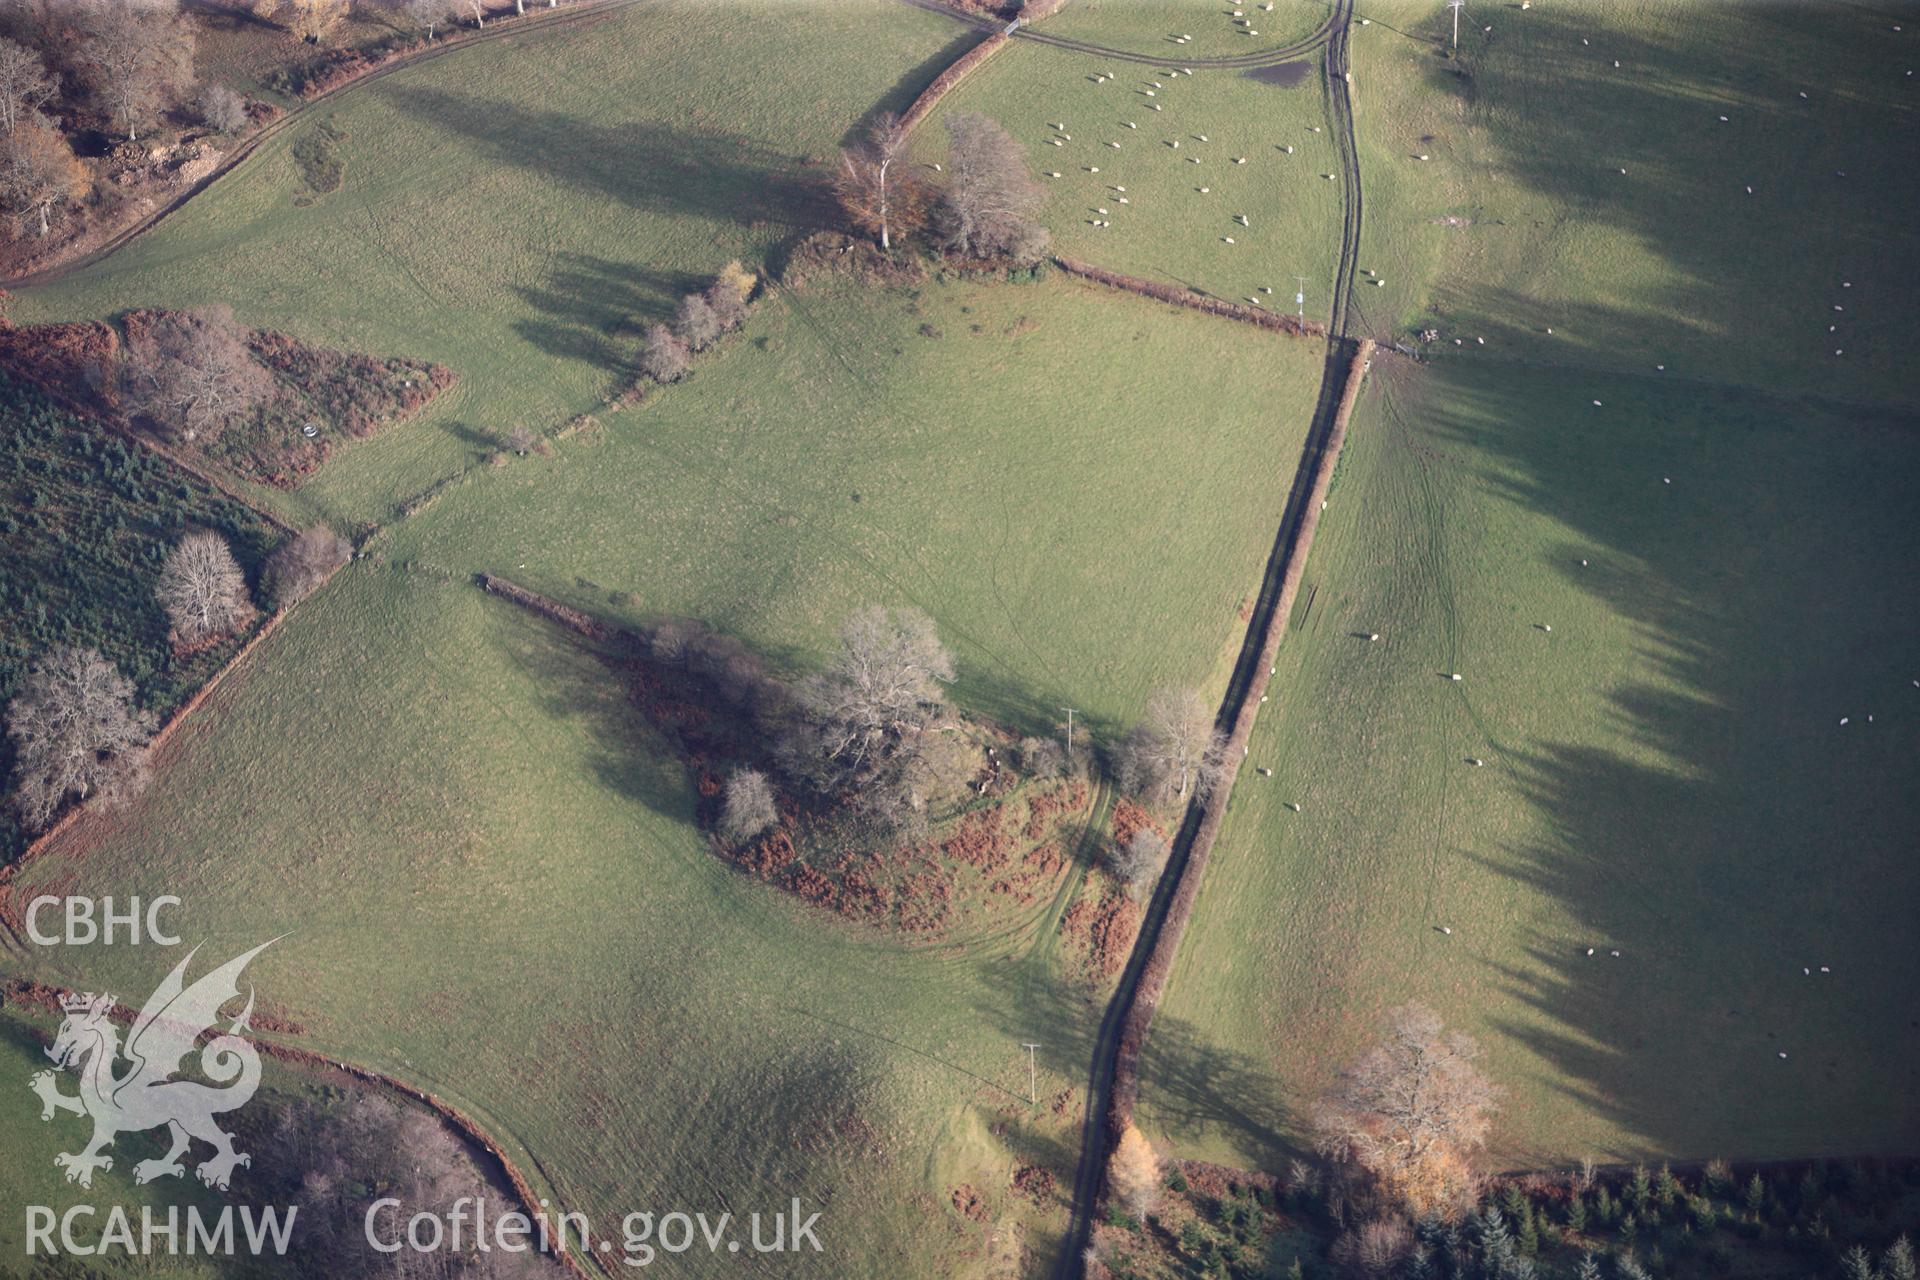 RCAHMW colour oblique photograph of Castell Caemaerdy. Taken by Toby Driver on 23/11/2012.